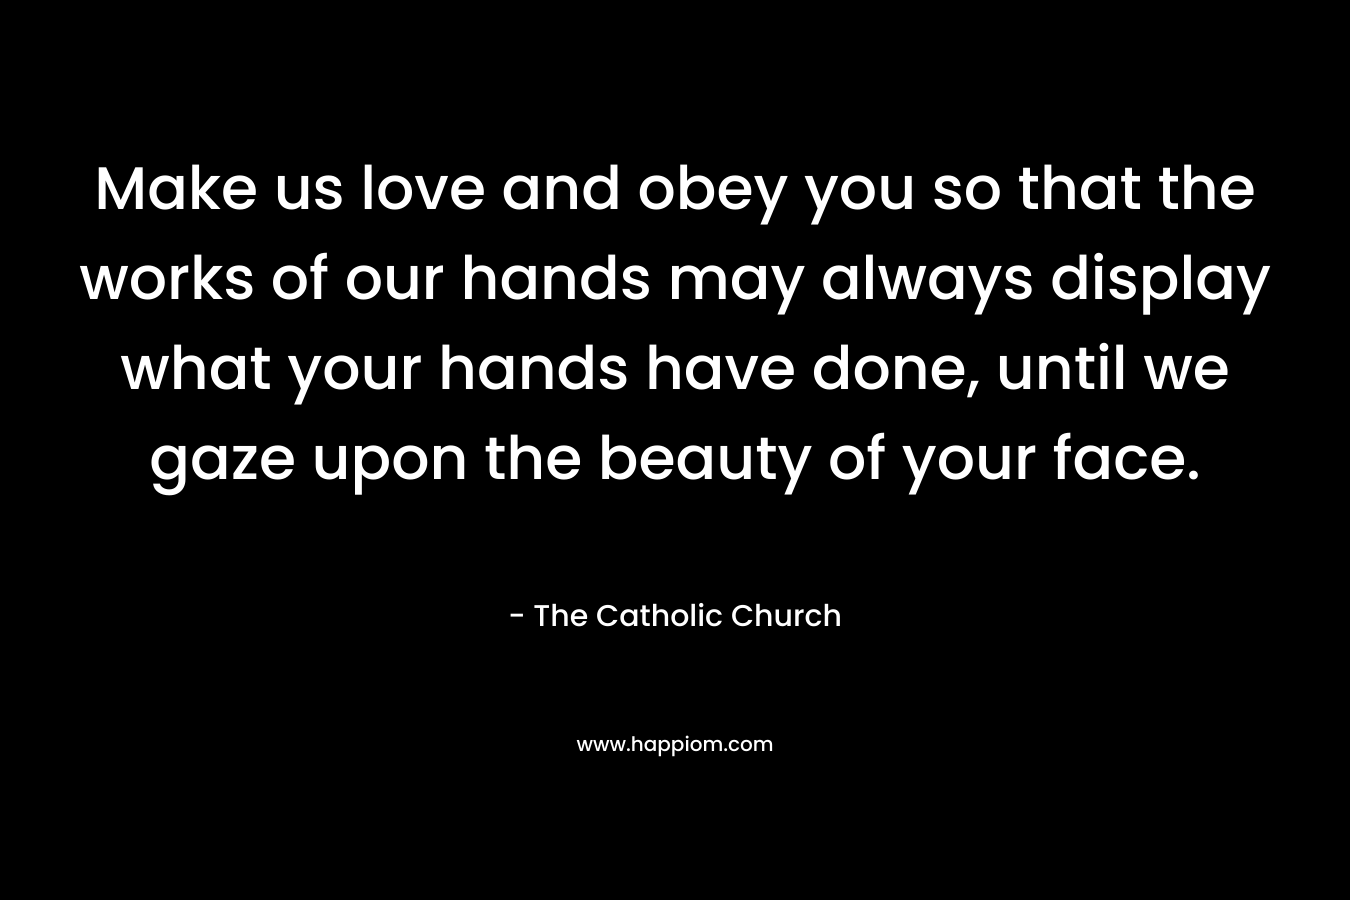 Make us love and obey you so that the works of our hands may always display what your hands have done, until we gaze upon the beauty of your face.